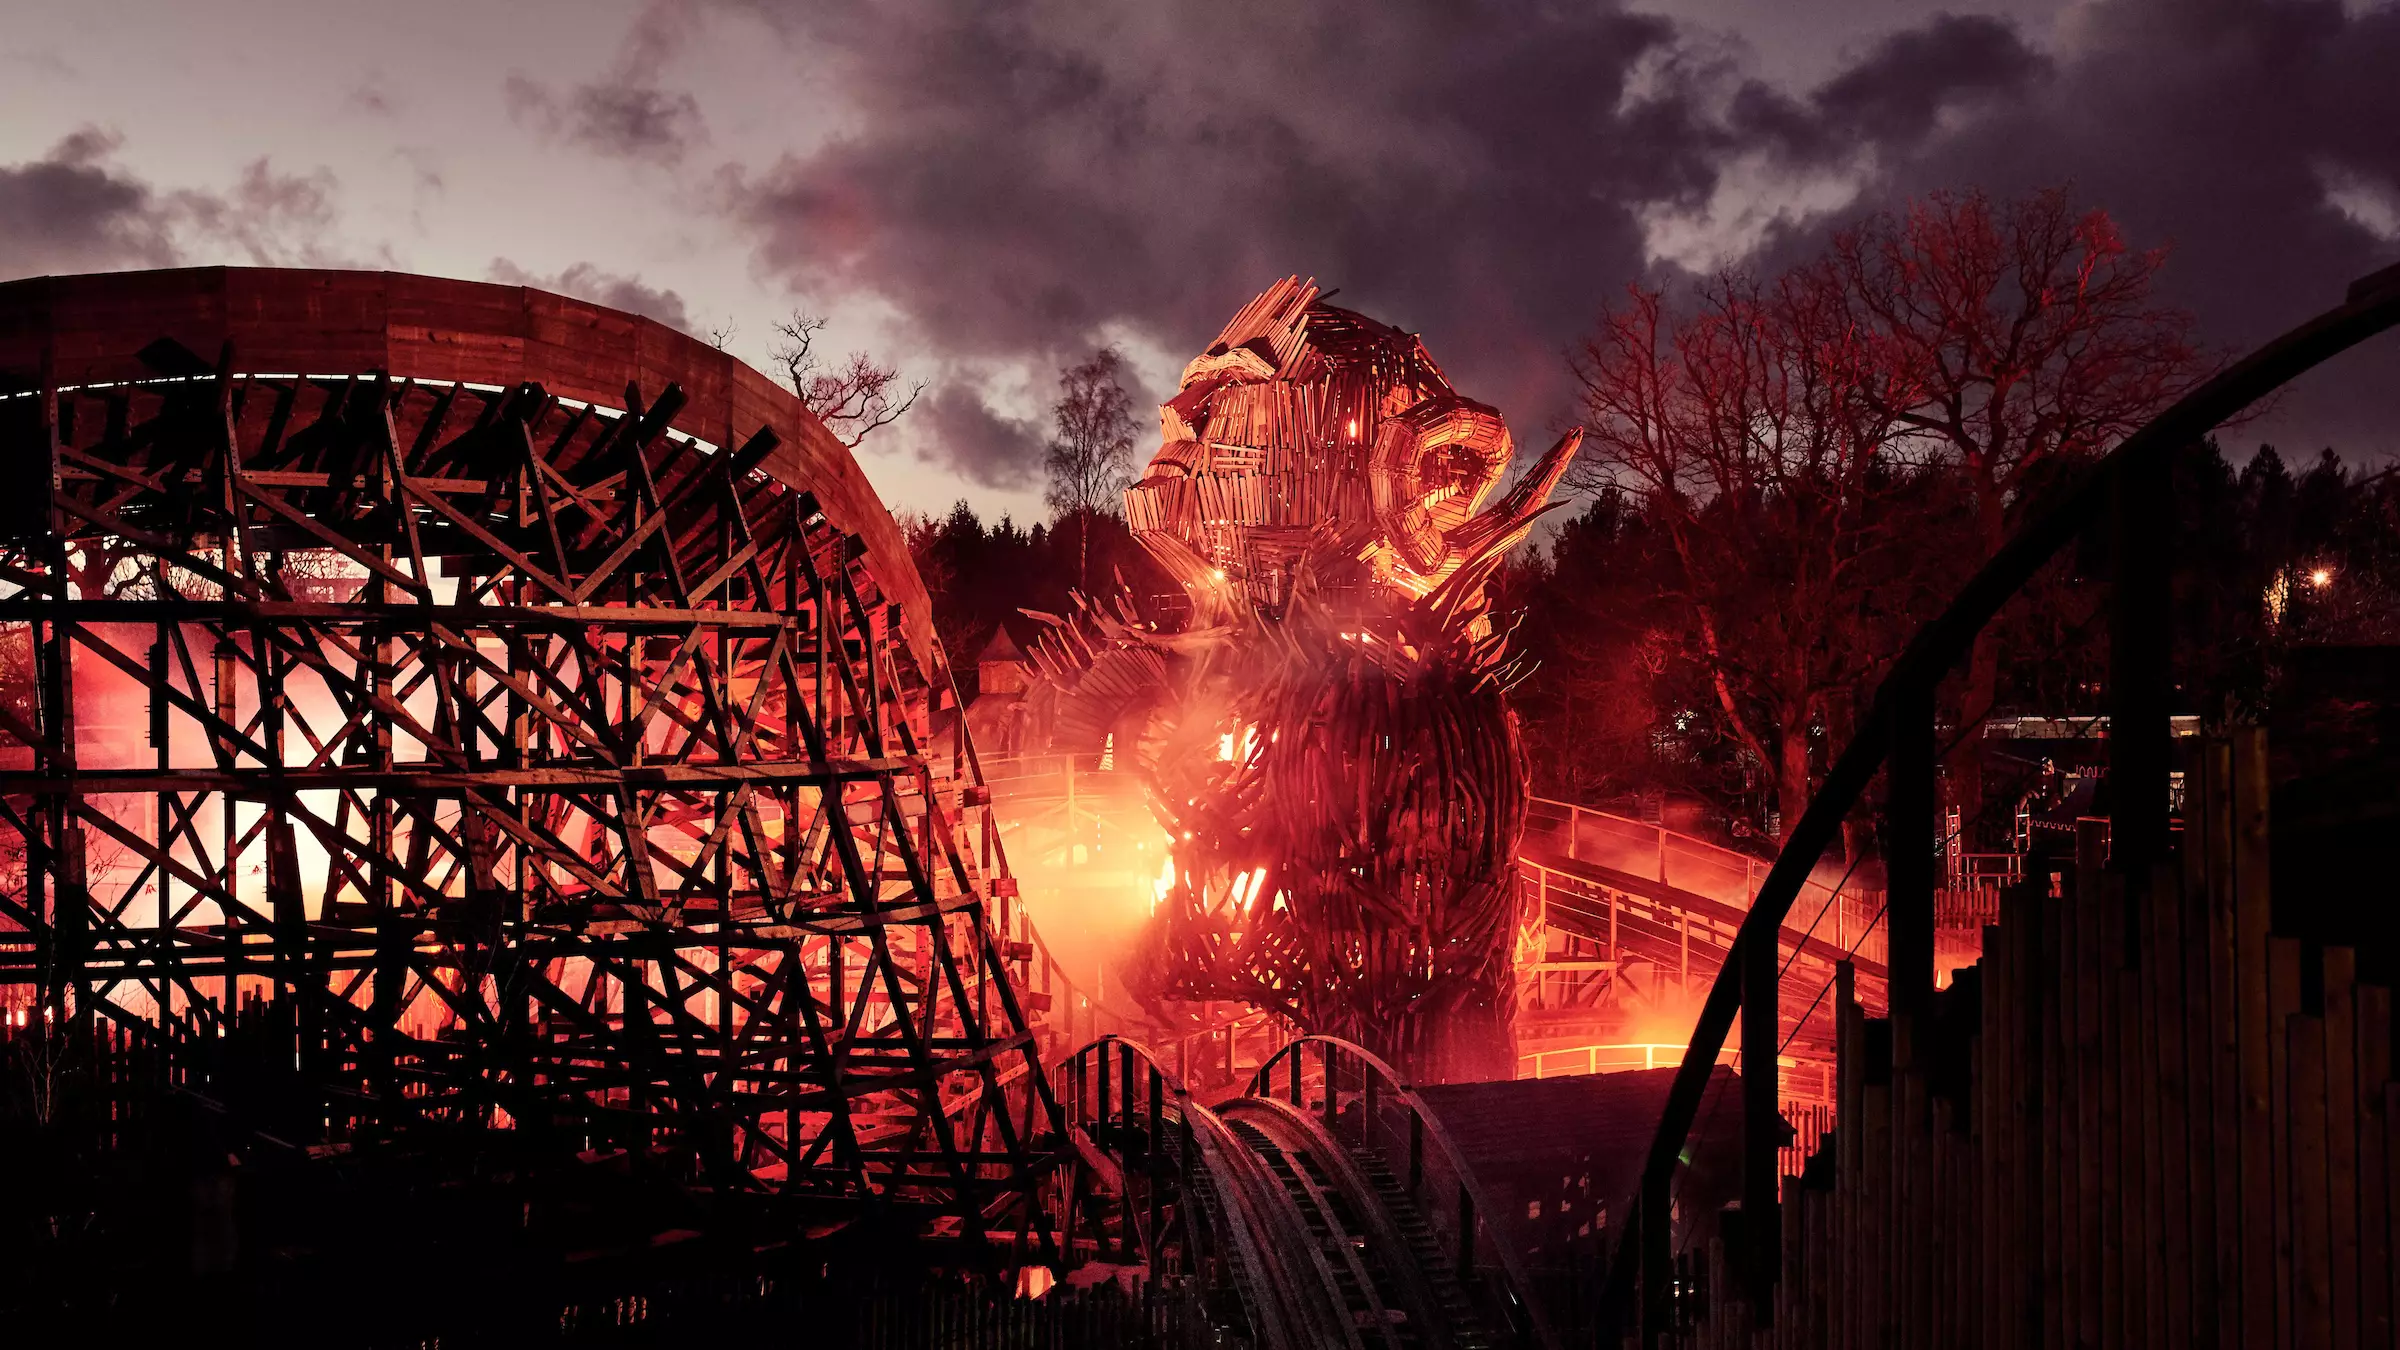 Wicker Man Rollercoaster At Alton Towers